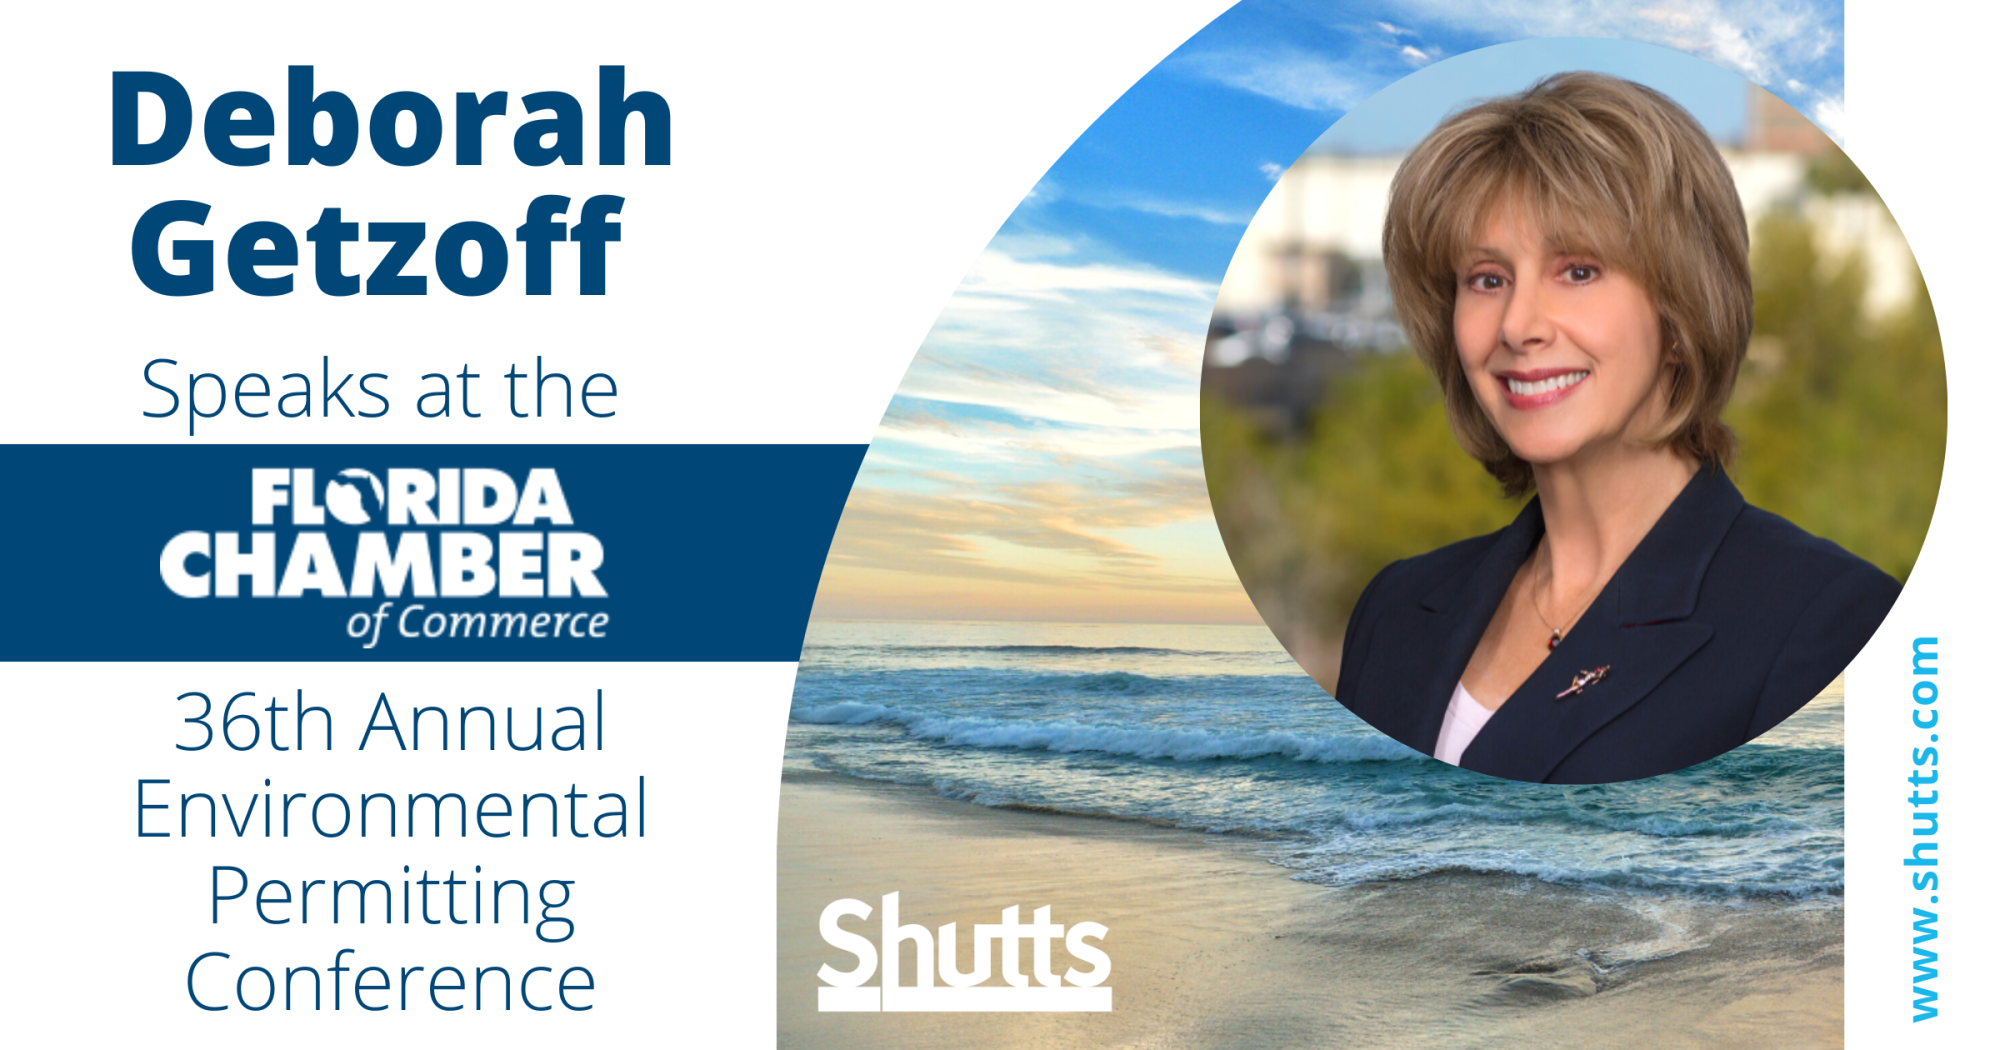 Deborah Getzoff Speaks at the Florida Chamber’s 36th Annual Environmental Permitting Conference